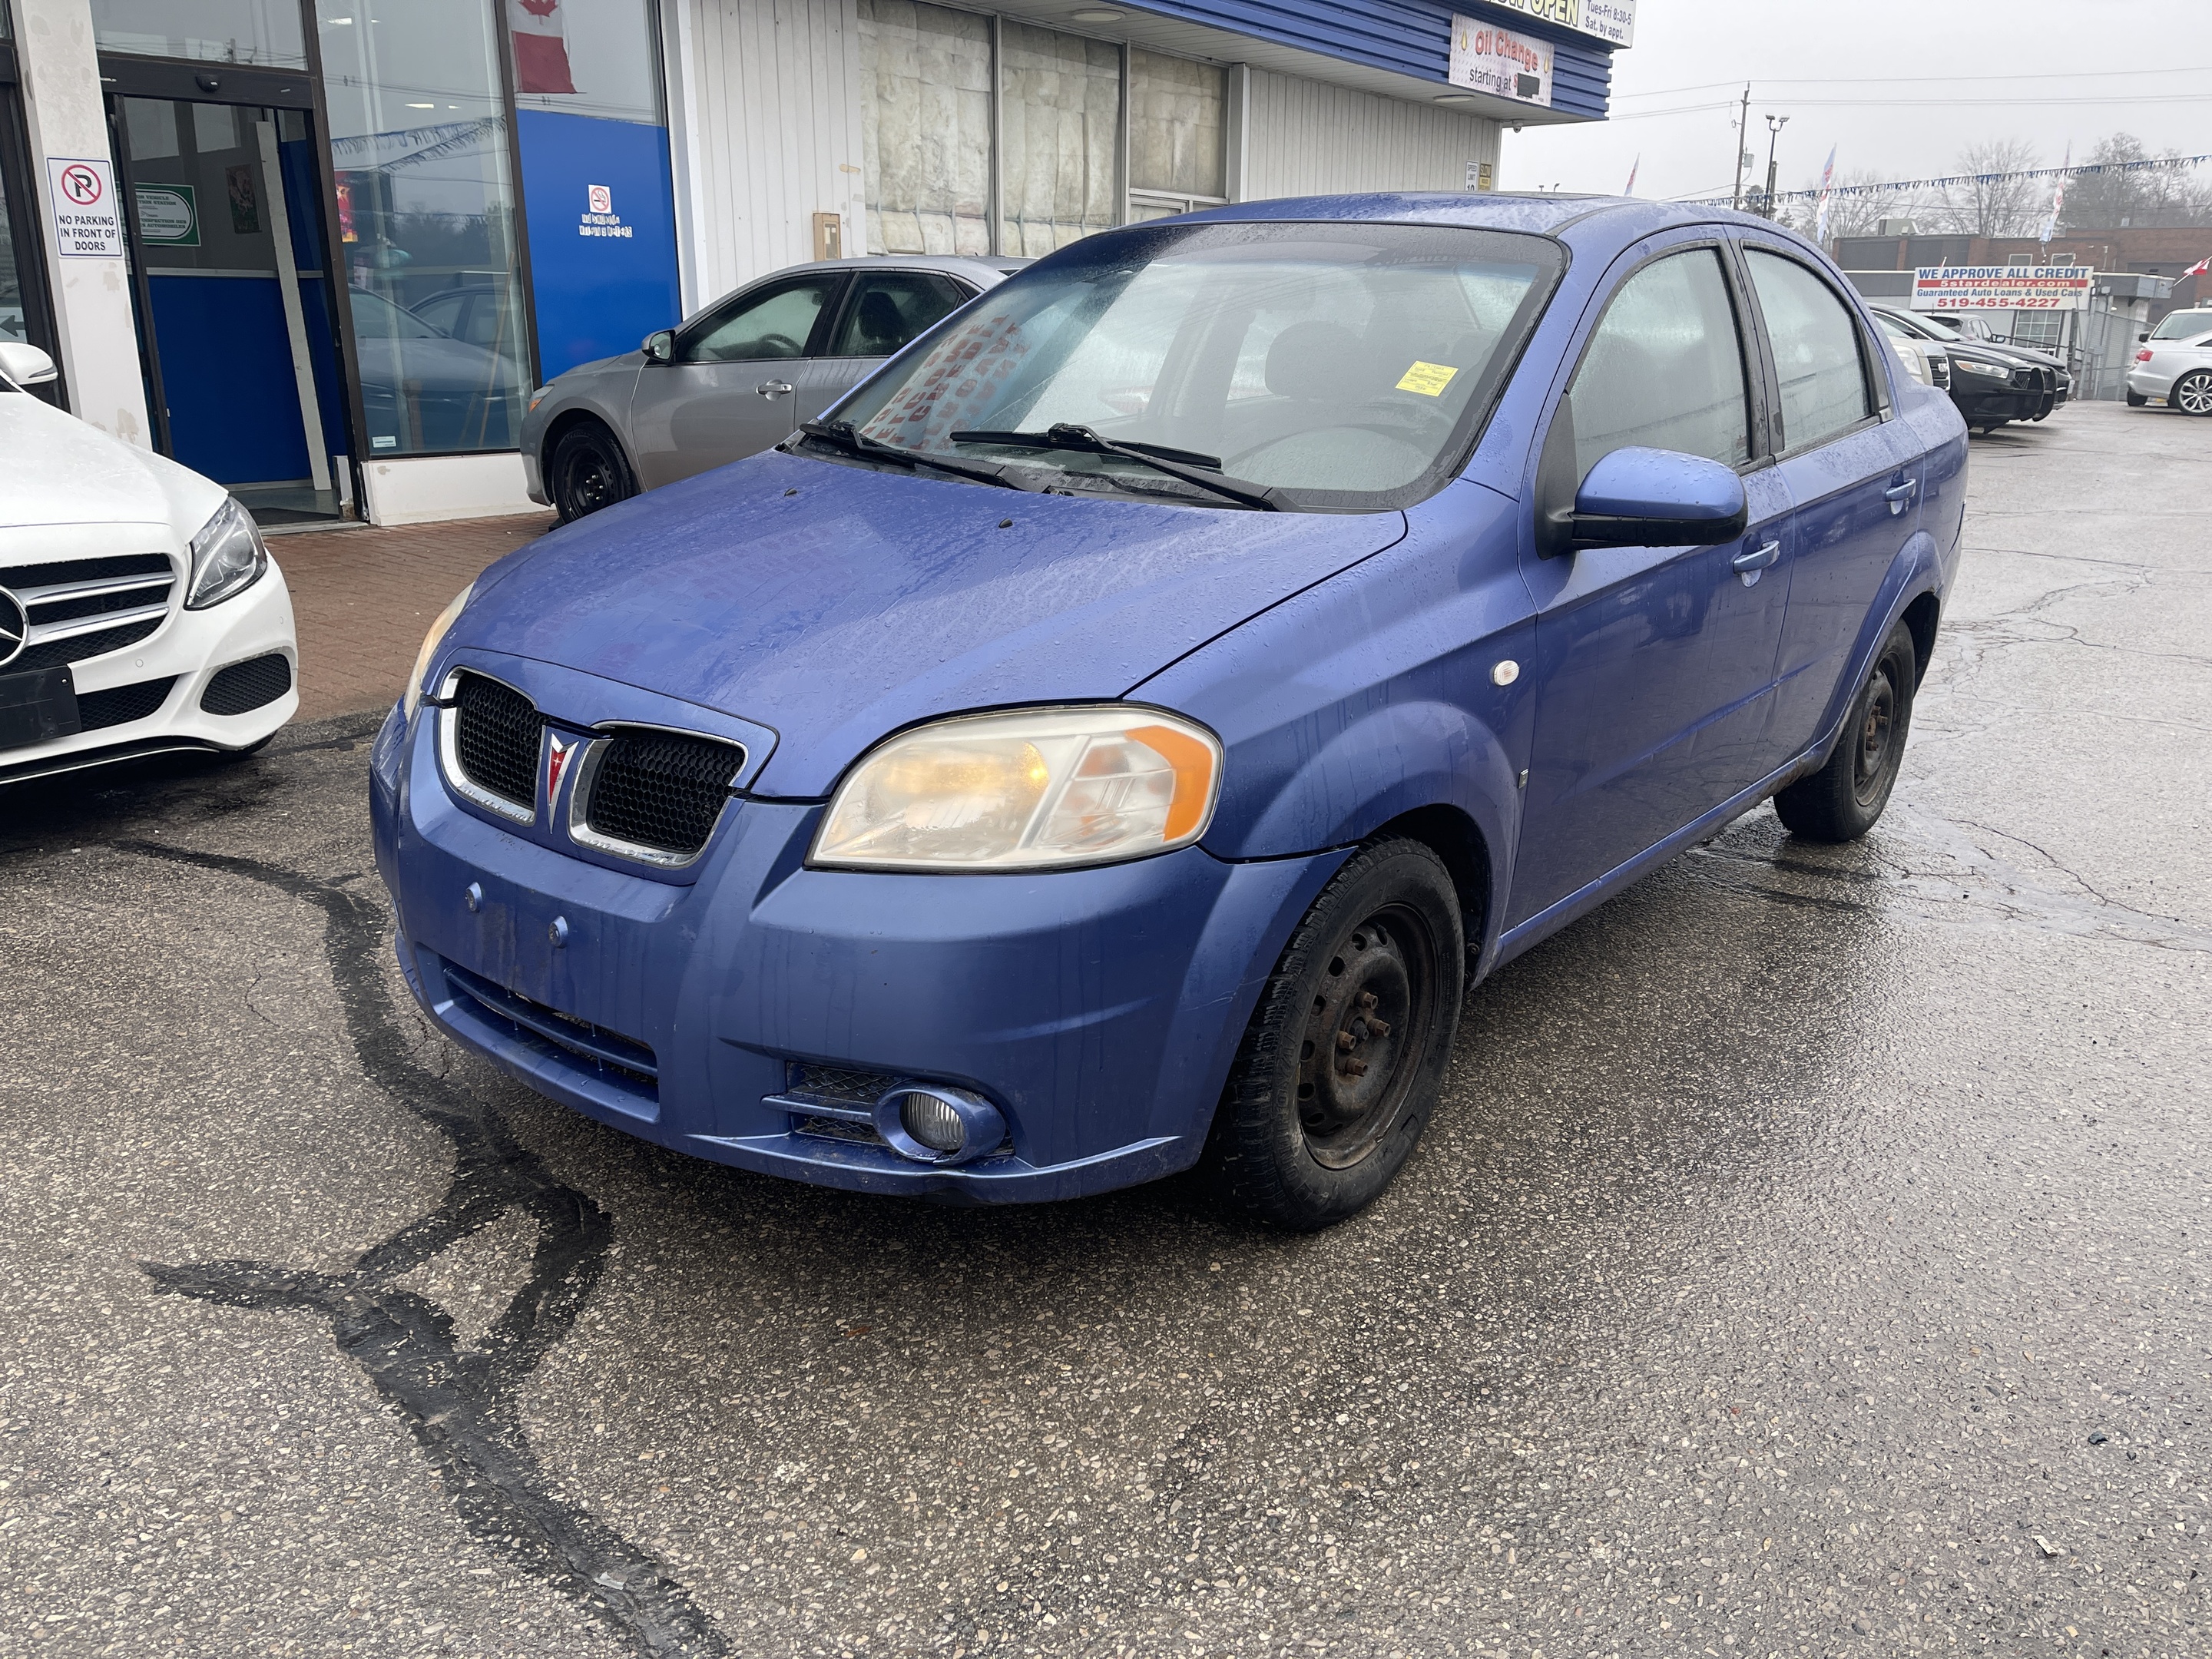 2008 Pontiac Wave WE FINANCE ALL CREDIT | 700+ VEHICLES IN STOCK 